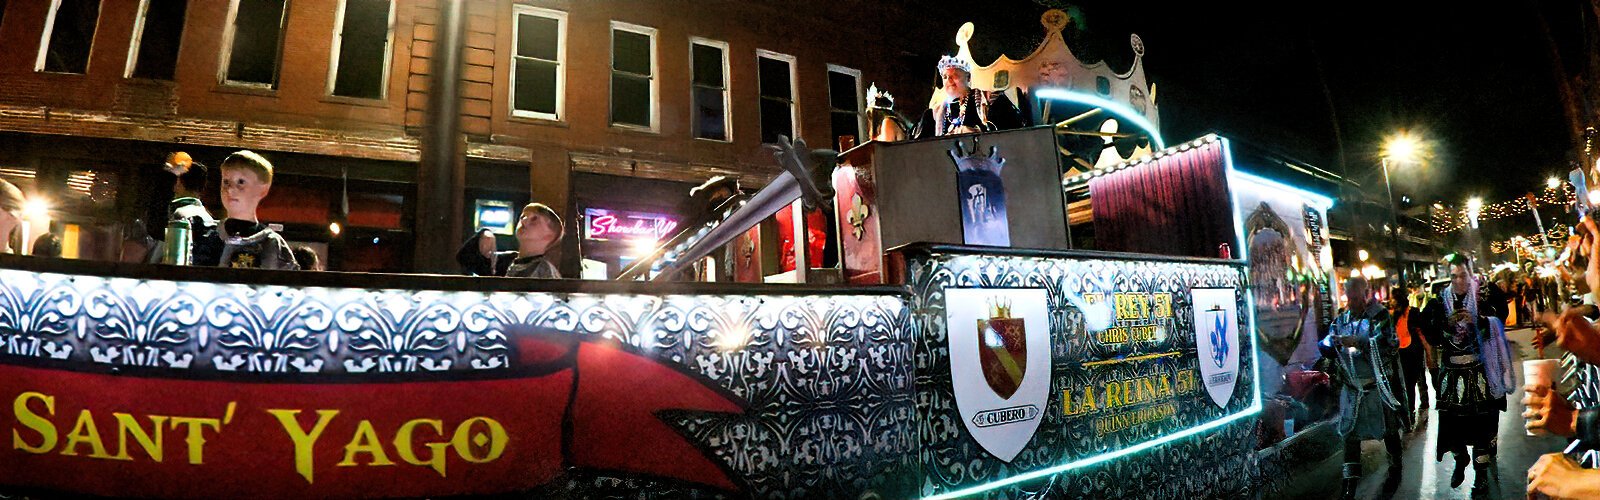 The annual Sant’ Yago Knight Parade in Ybor City  introduces the Krewe of Sant’ Yago’s new El Rey (King) Chris Cubero and La Reina (Queen) Quinn Erickson.